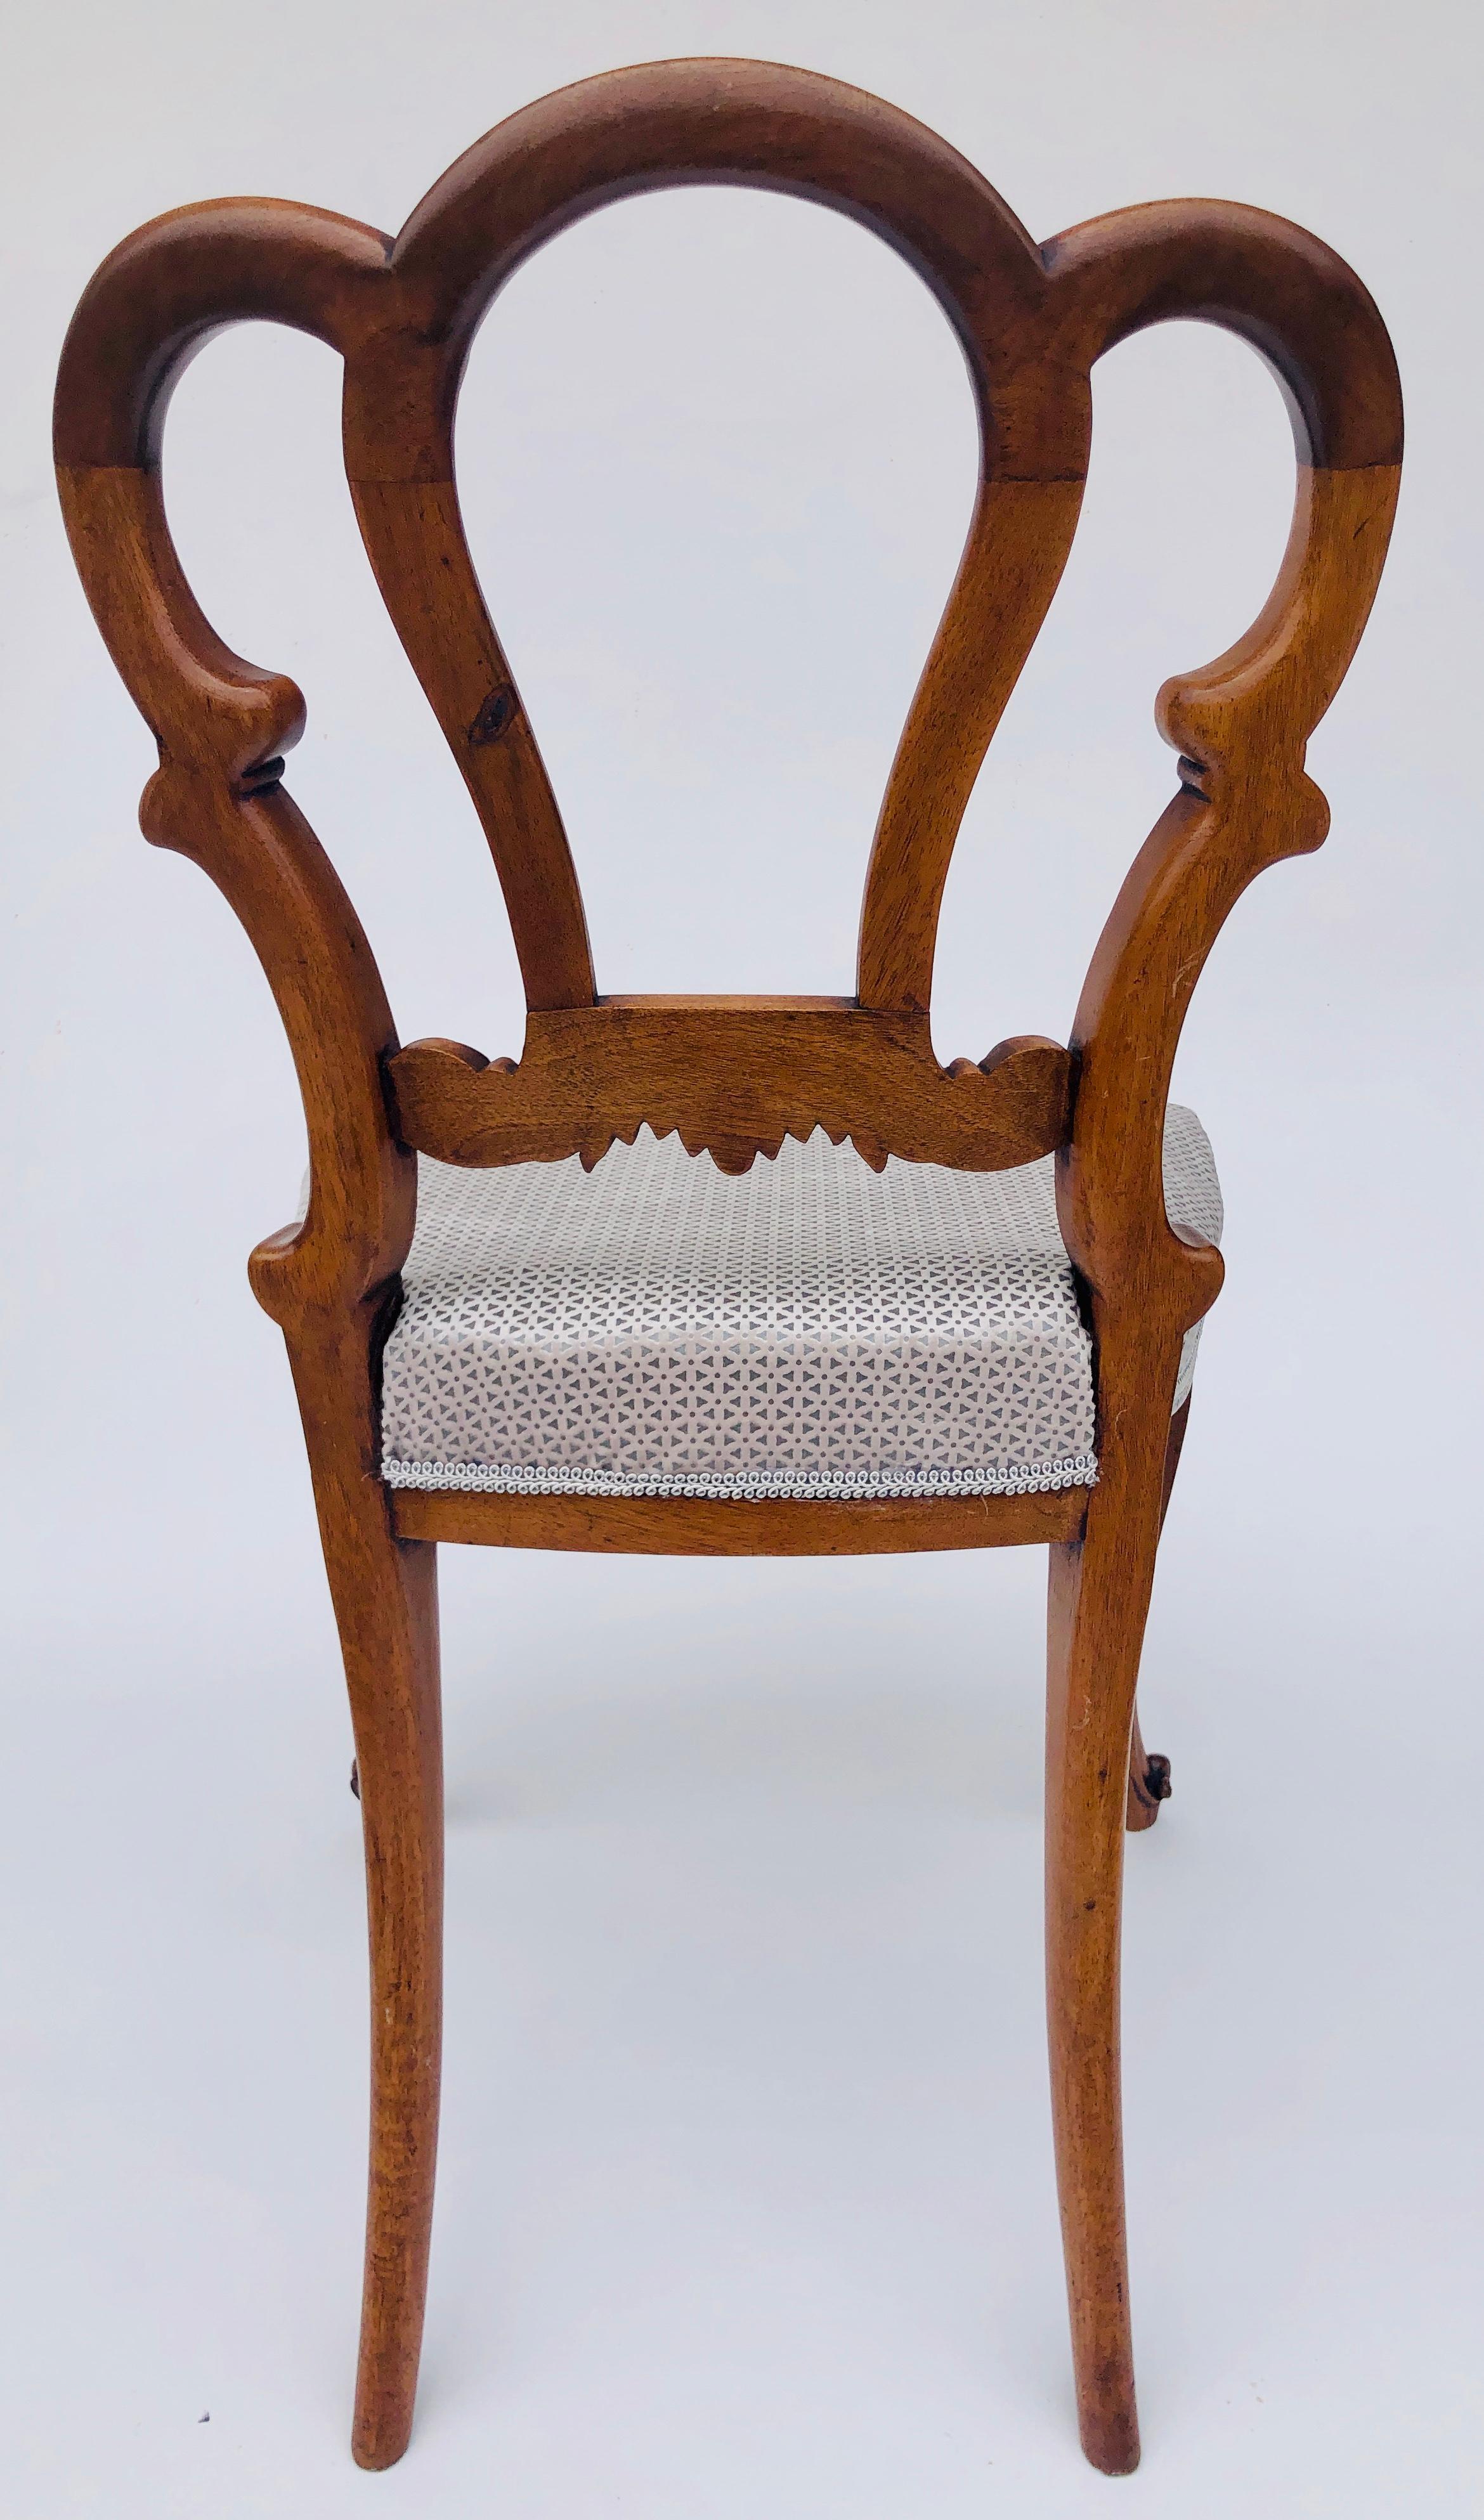 Pair of fine quality Victorian walnut side chairs having a lovely shaped walnut back and shaped splats to the centre, newly reupholstered in quality fabric. Standing on shaped cabriole legs to the front and outswept back legs. Lovely color and